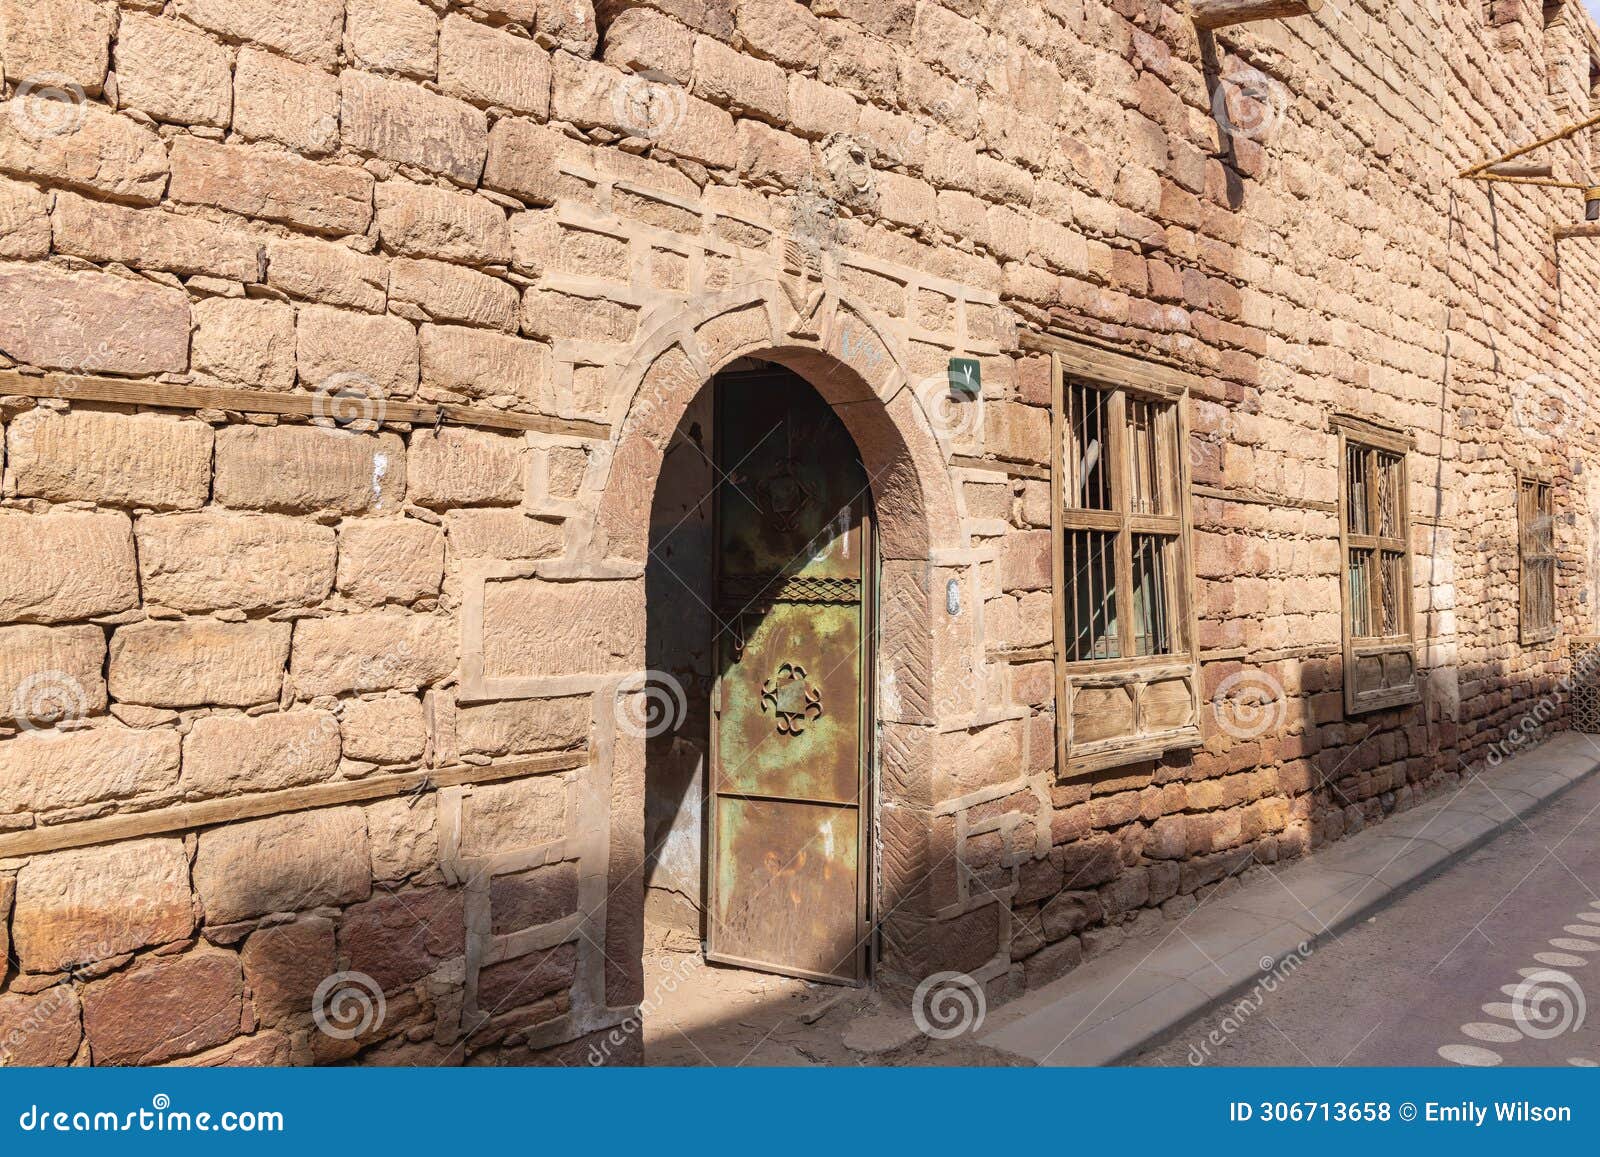 stone building in old town al-ula